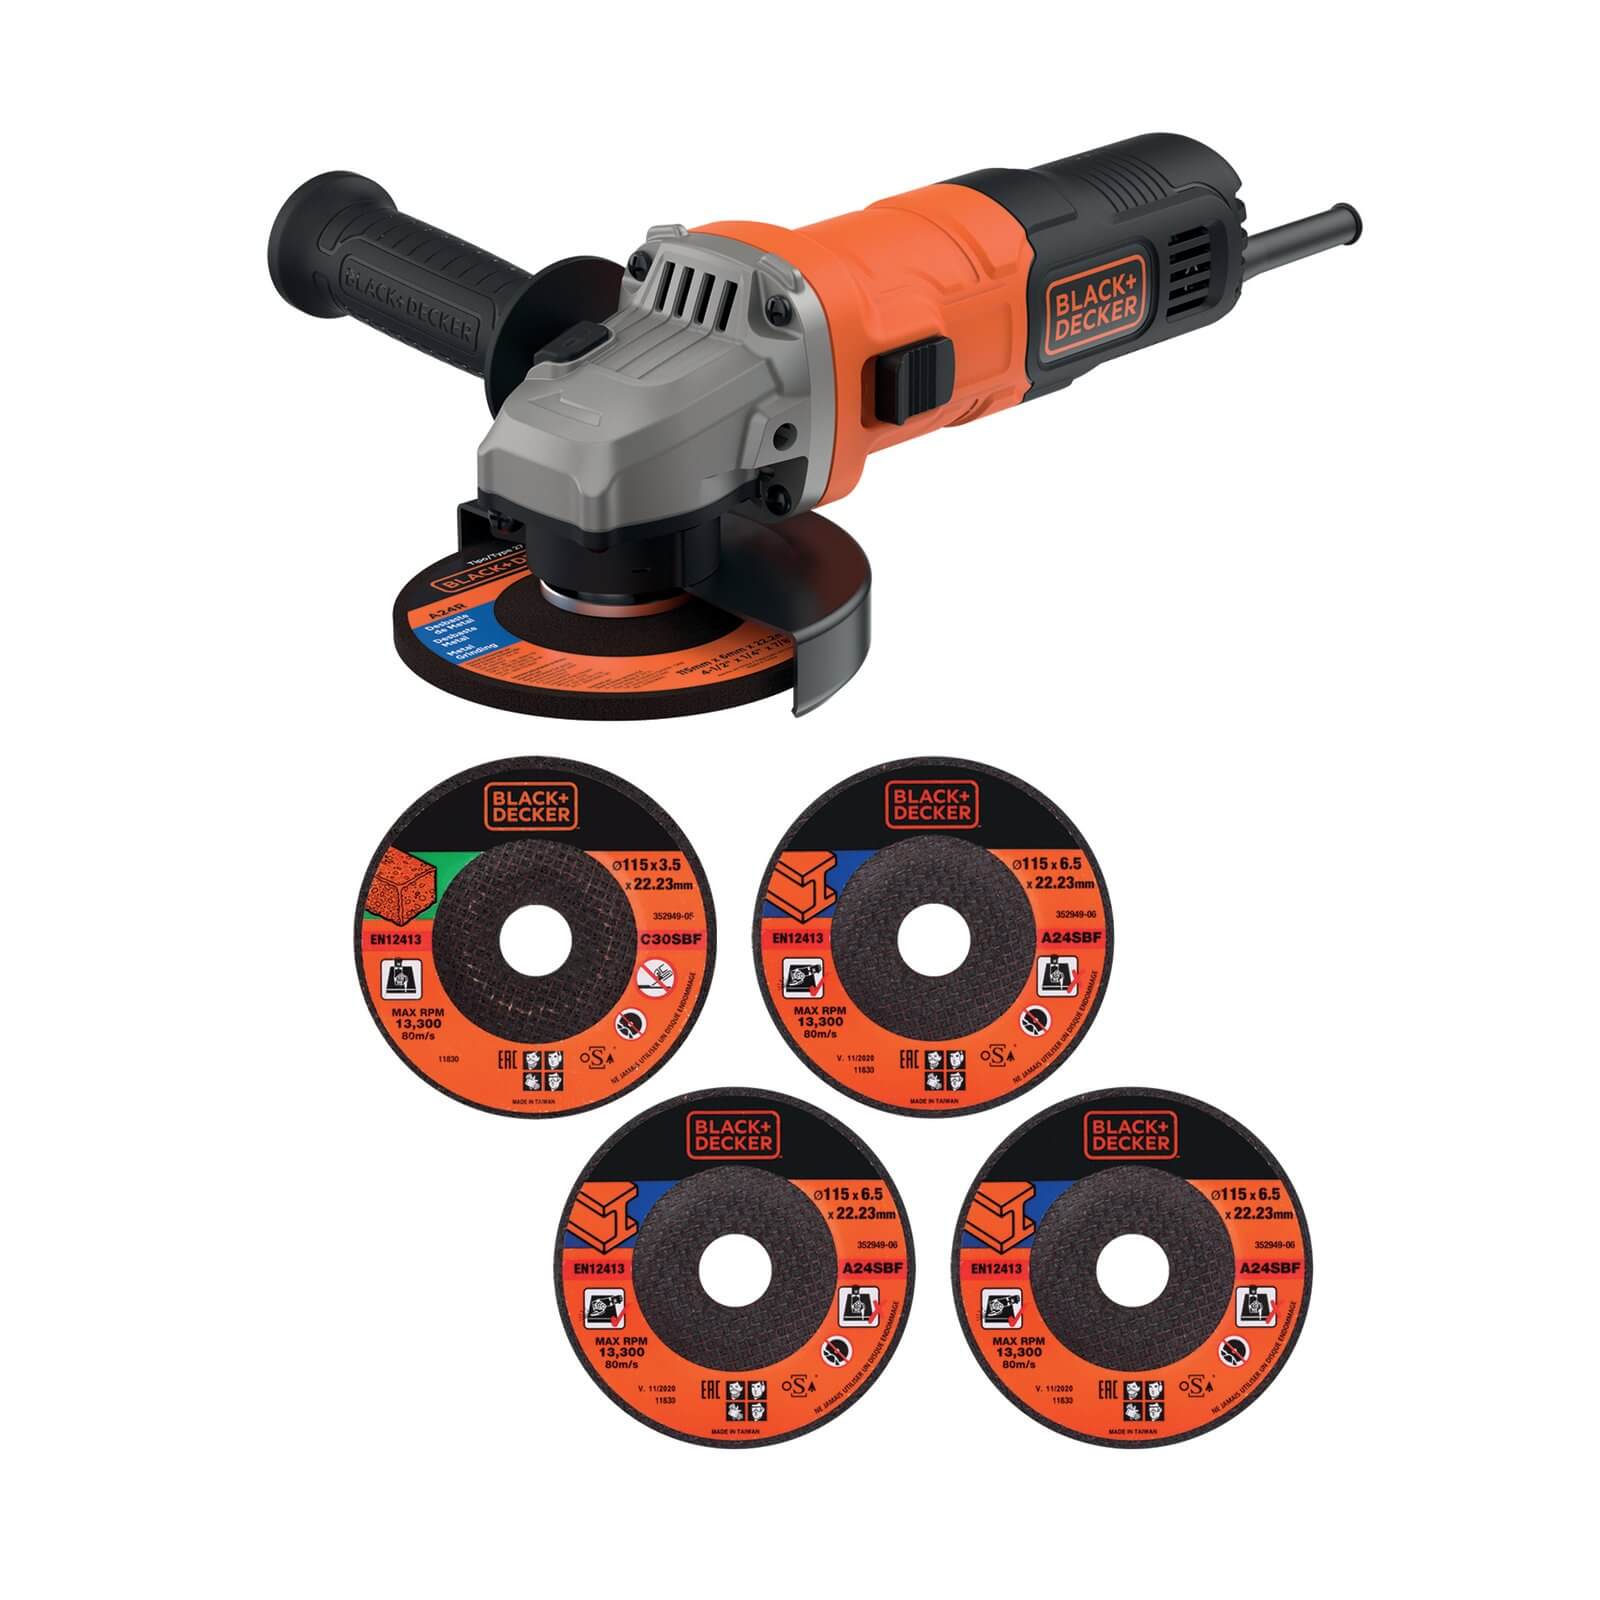 BLACK+DECKER 115mm 710W Corded Angle Grinder with 5 Cutting Discs (BEG010A5-GB)